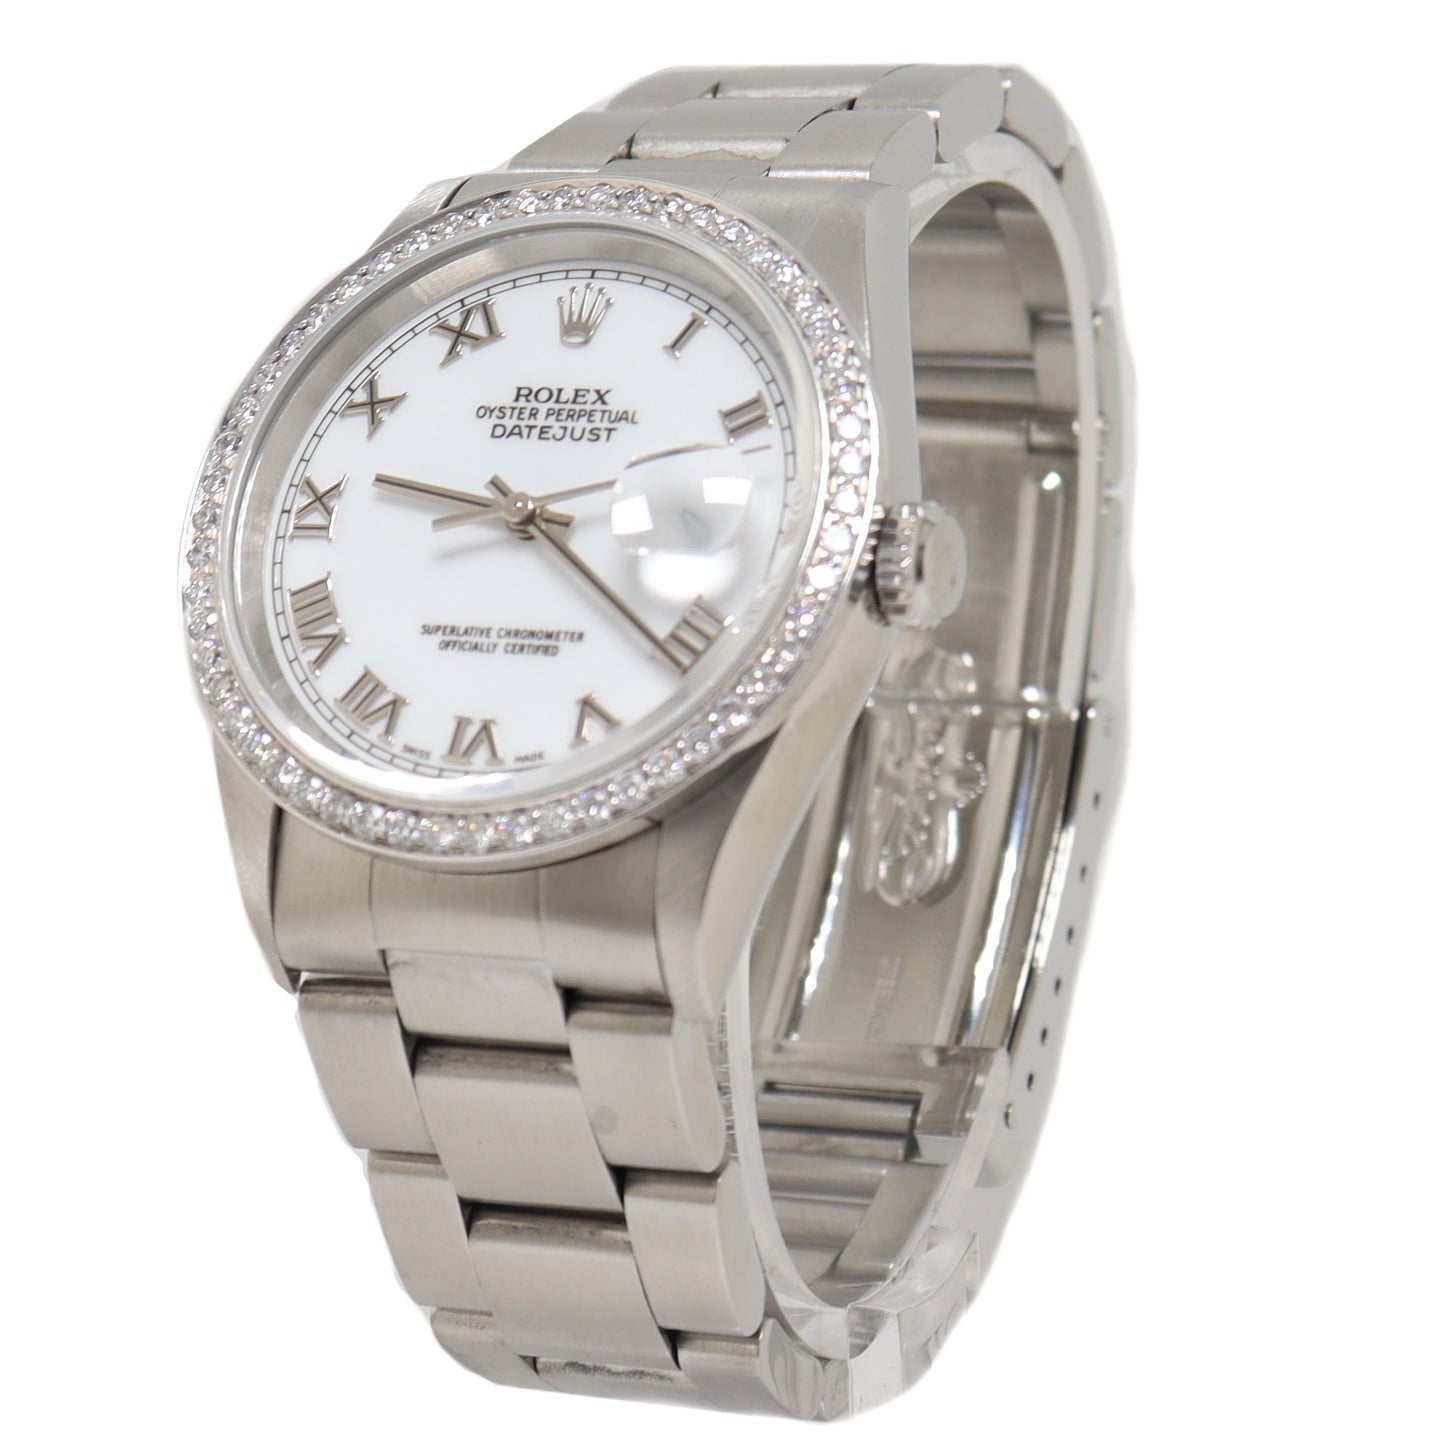 Load image into Gallery viewer, Rolex Mens Datejust Stainless Steel 36mm White Roman Dial Watch Reference# 16200 - Happy Jewelers Fine Jewelry Lifetime Warranty
